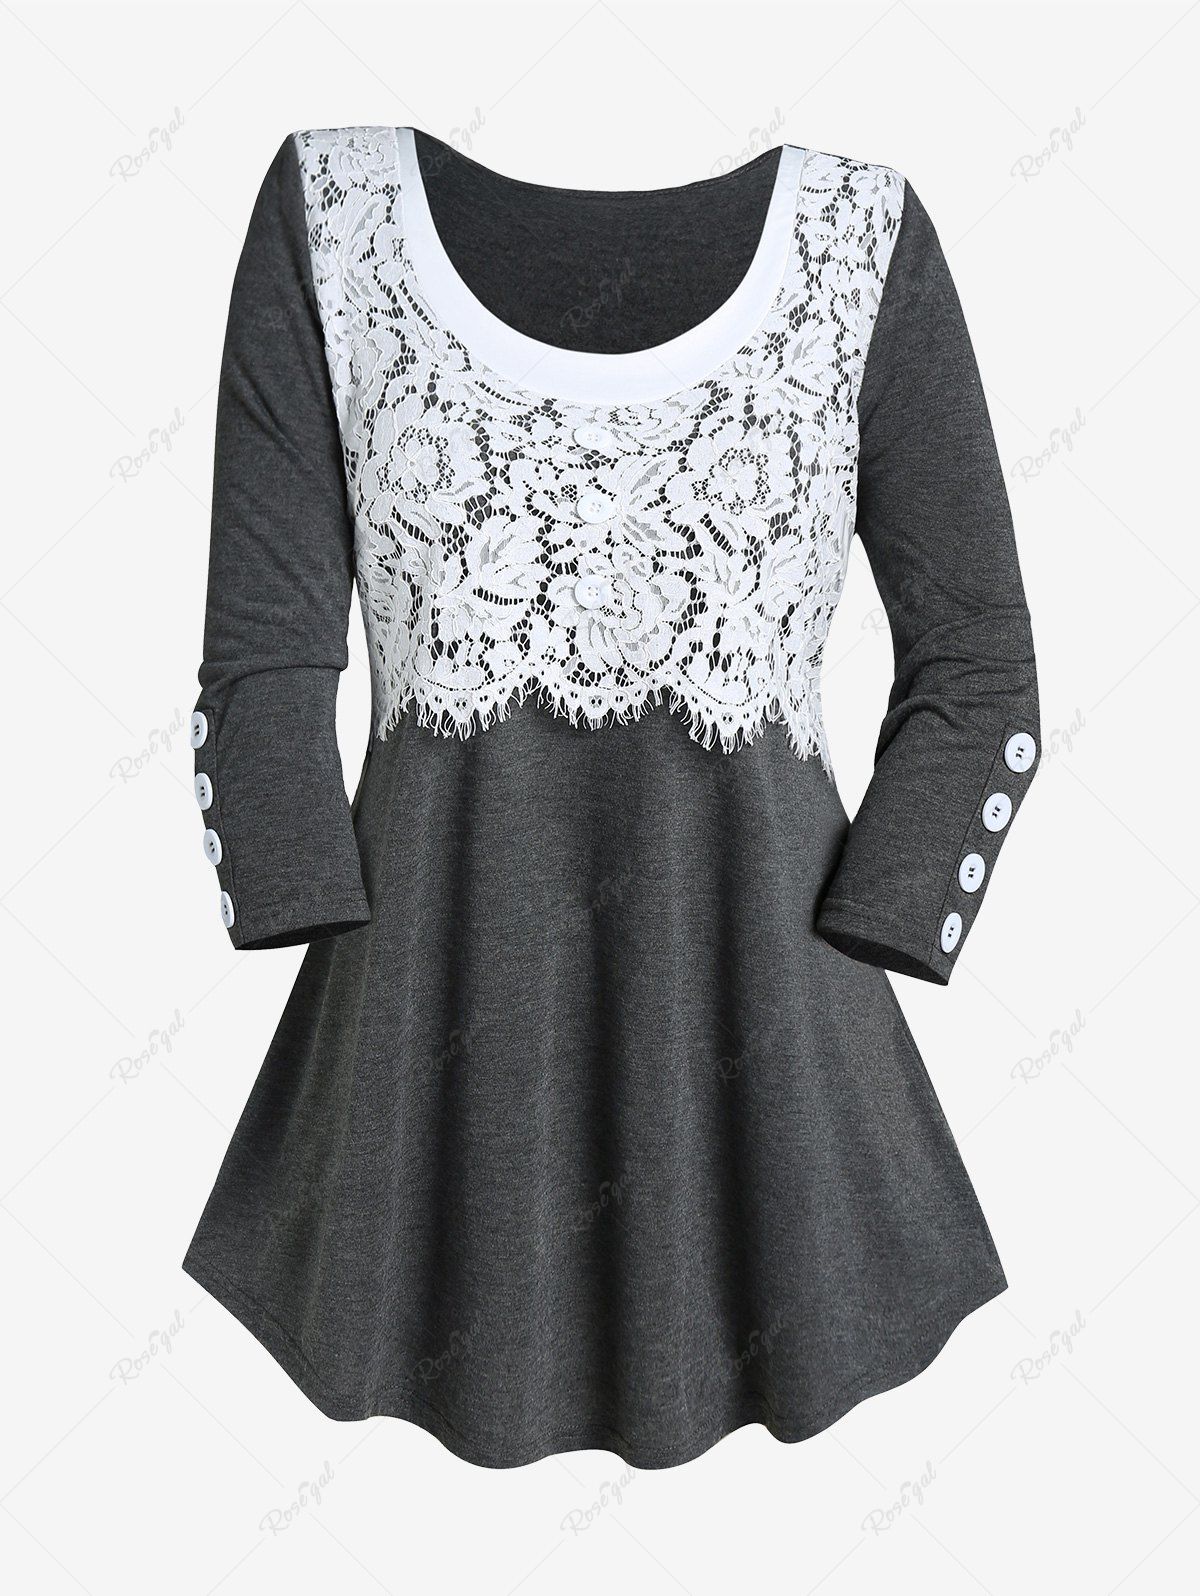 Chic Plus Size Contrast Lace Panel Tee  